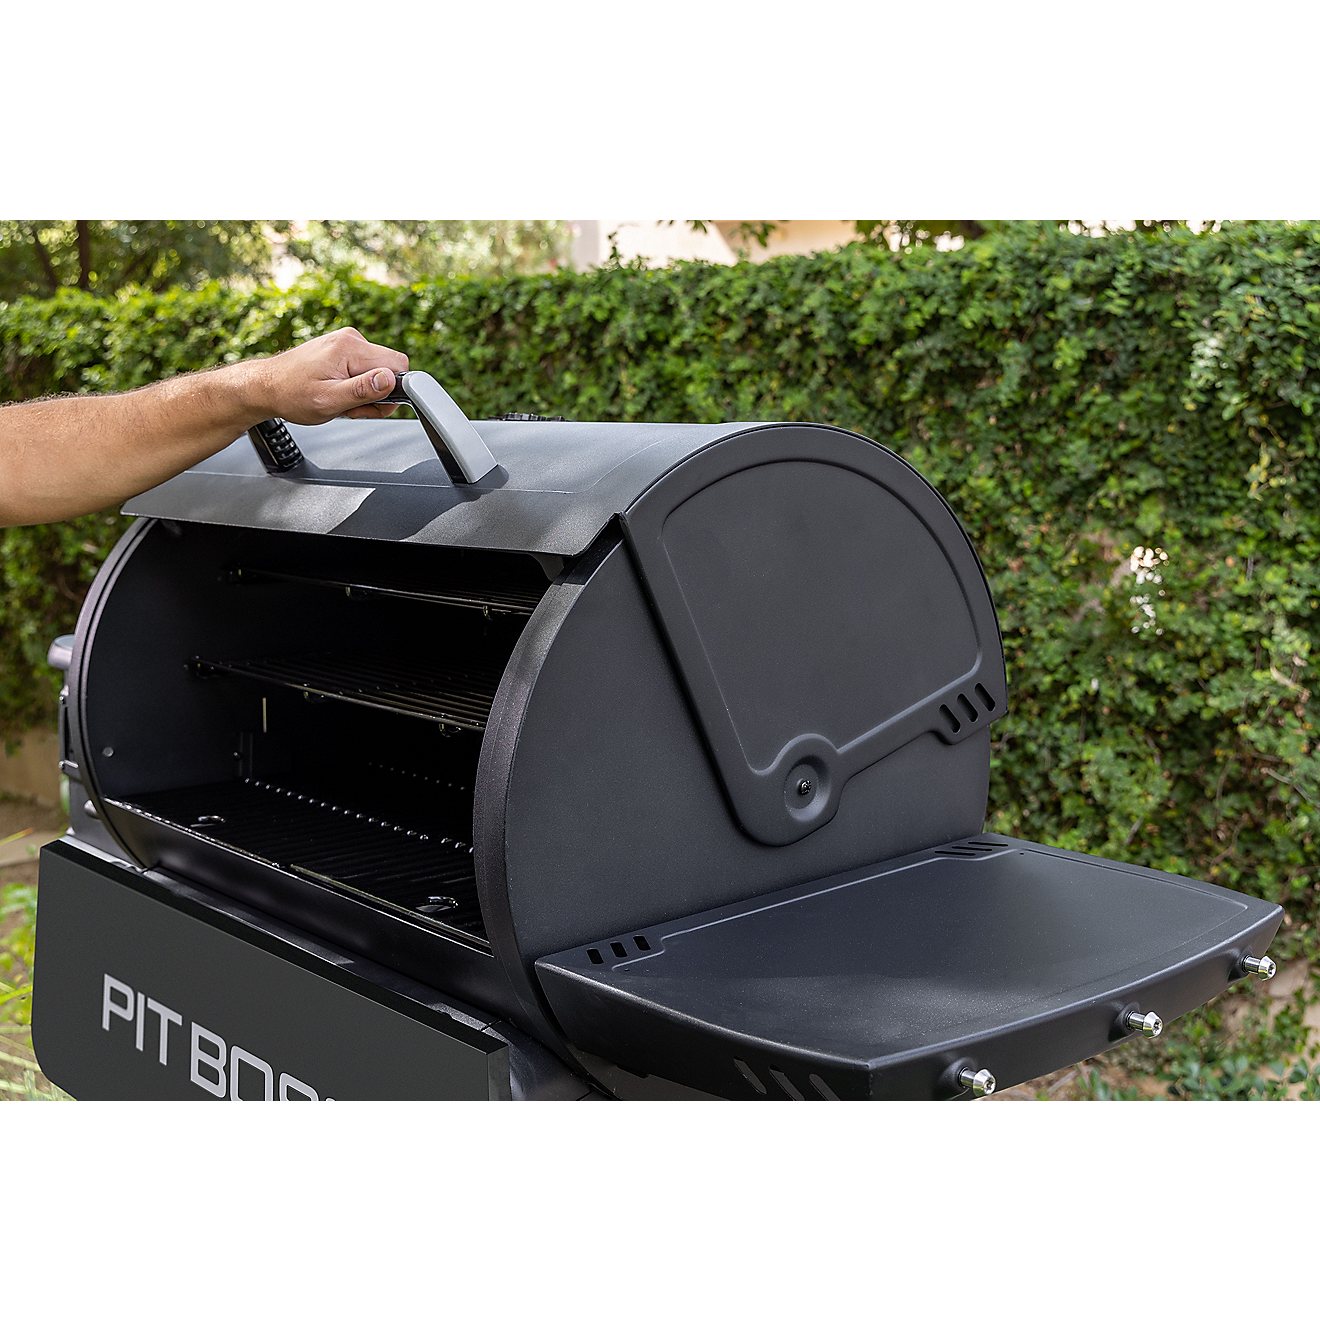 Pit Boss 1600 Competition Series Pellet Grill                                                                                    - view number 8